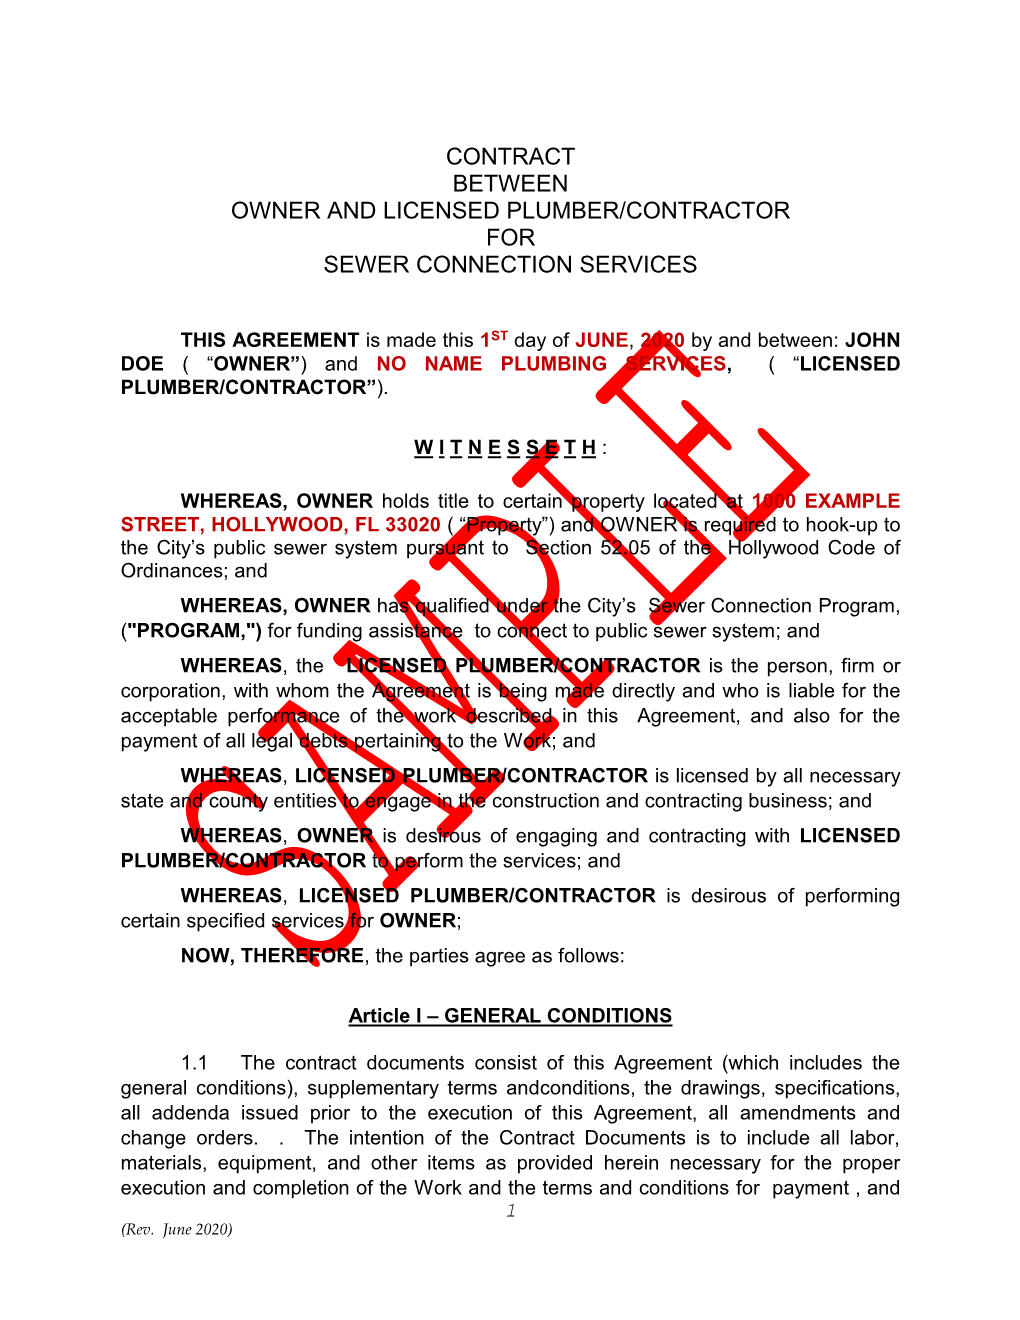 Contract Between Owner and Licensed Plumber/Contractor for Sewer Connection Services